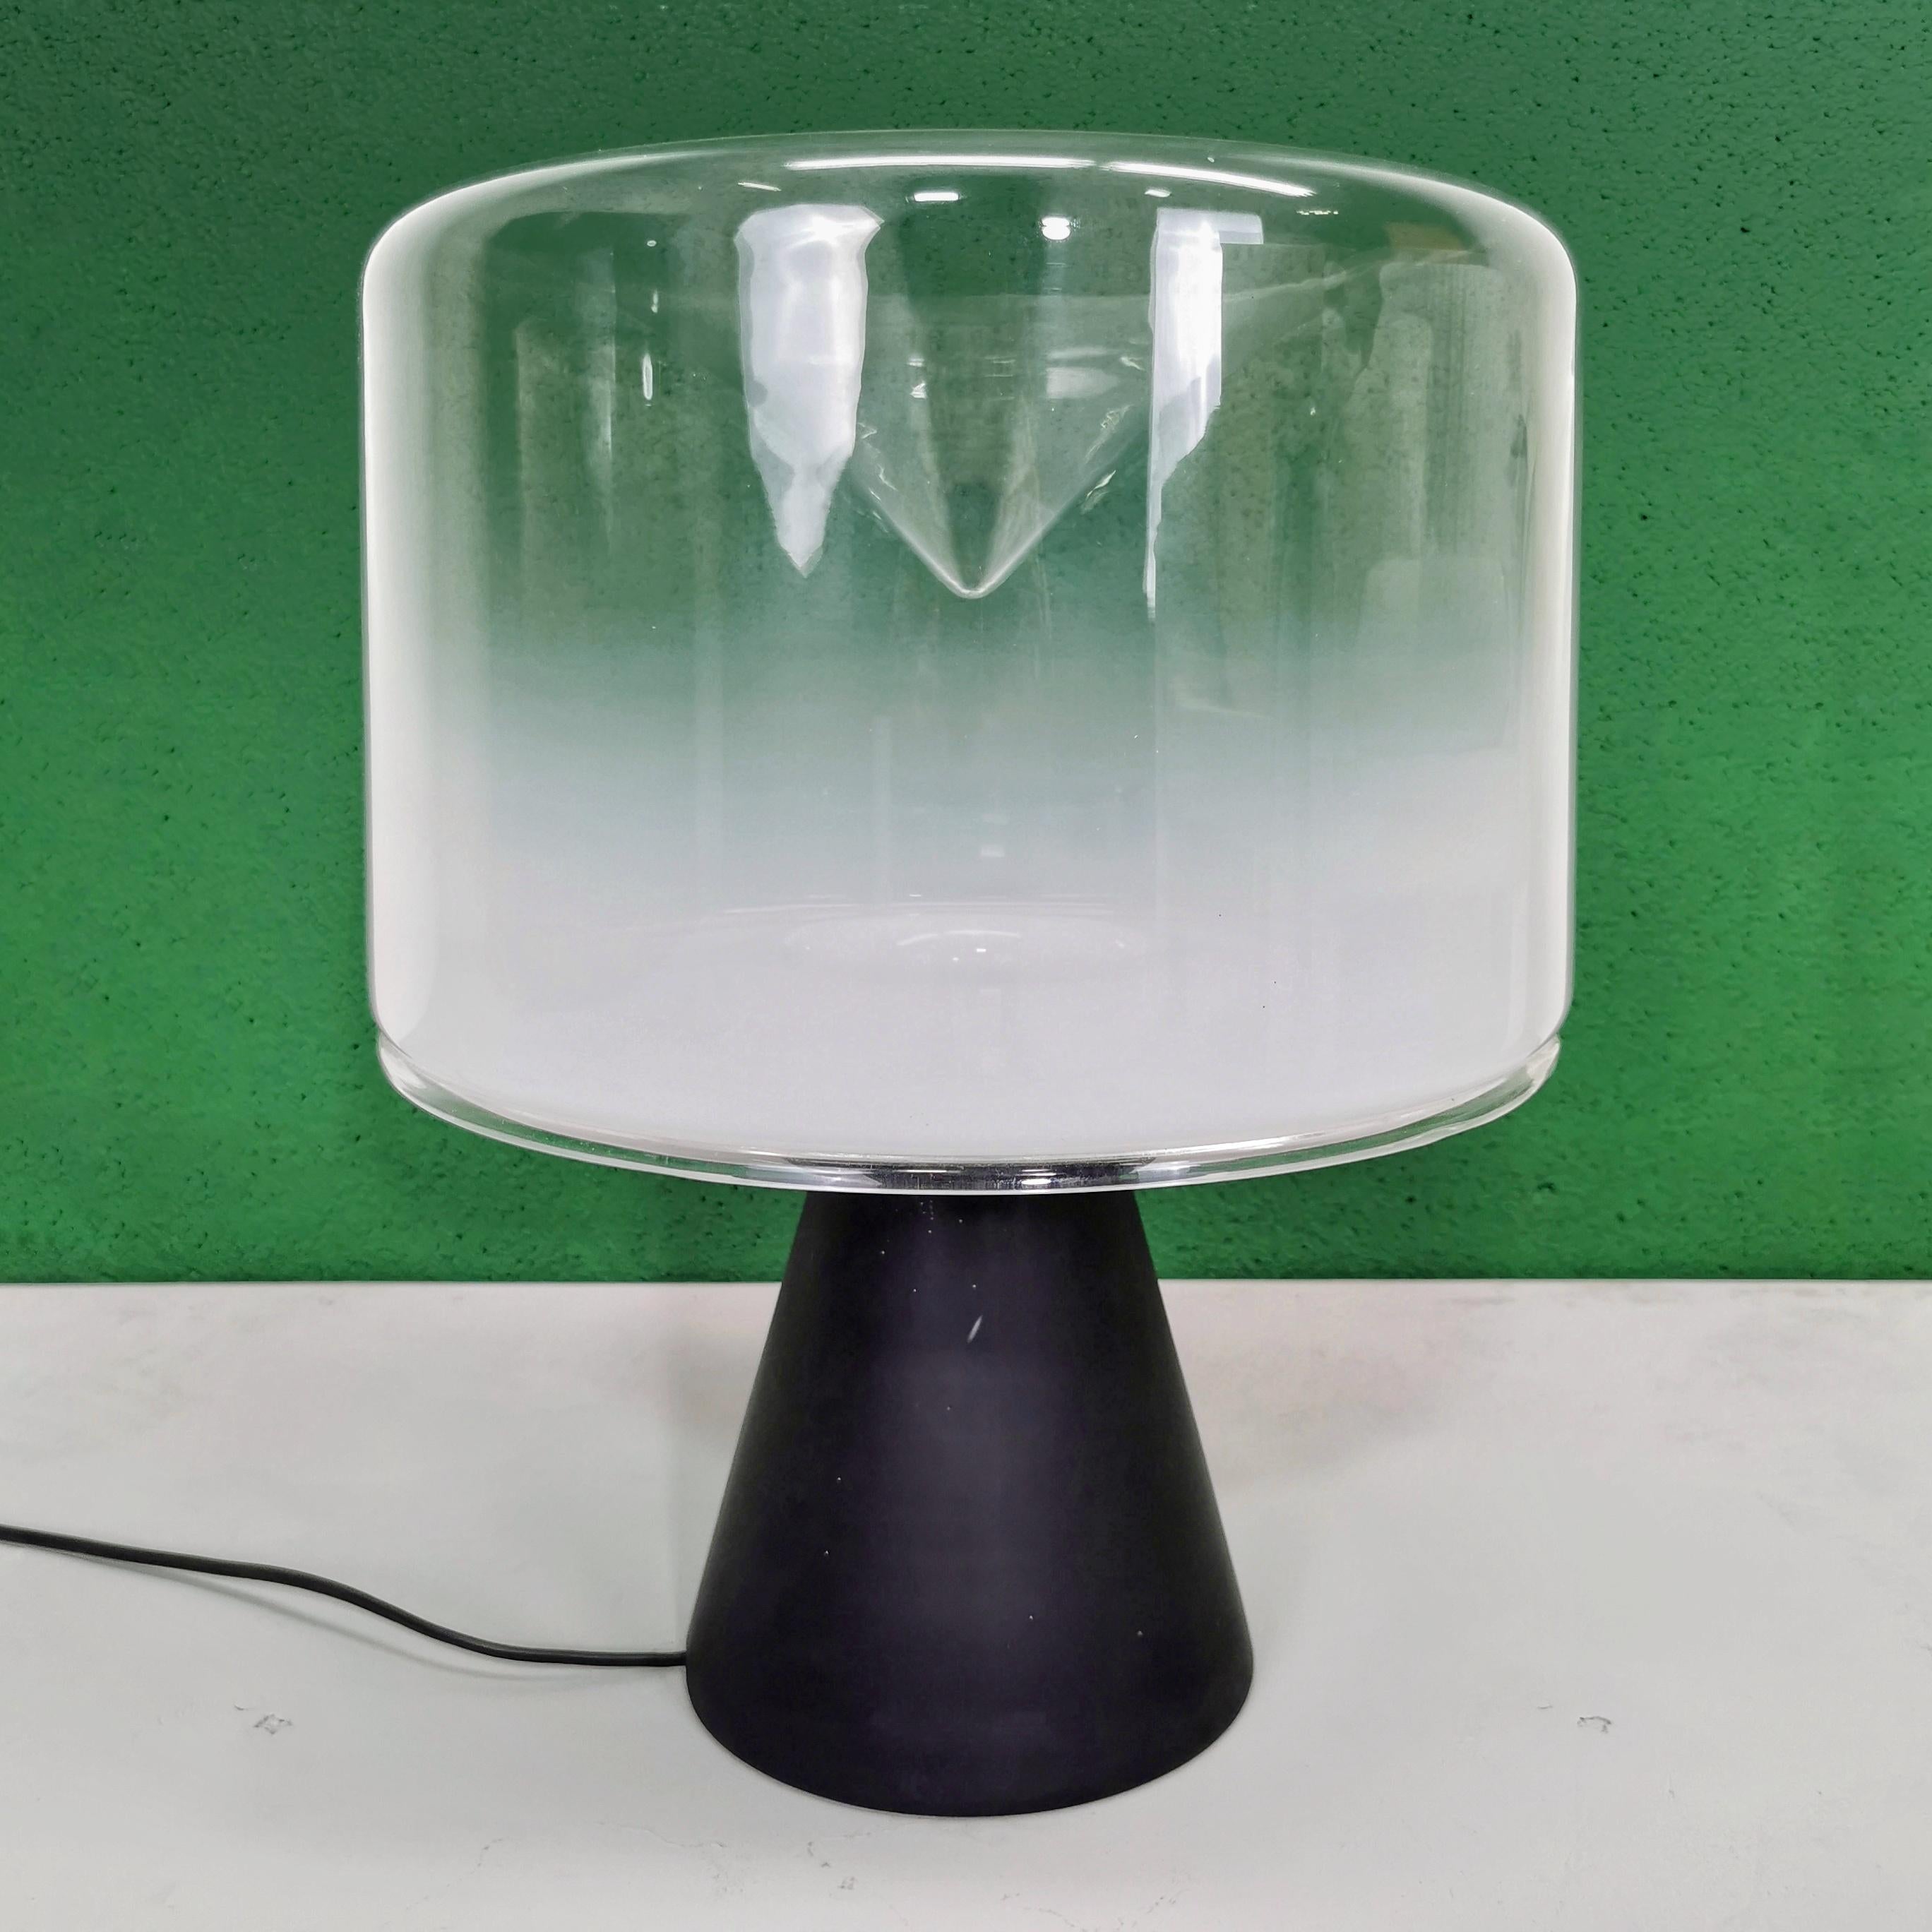 Large table lamp model Concerto designed in 1977 by Roberto Pamio for Leucos.
The diffuser is a large blown glass cylinder with conical recess, produced by Leucos in the best tradition of Murano glass.
Unique feature of this lamp is that the base is